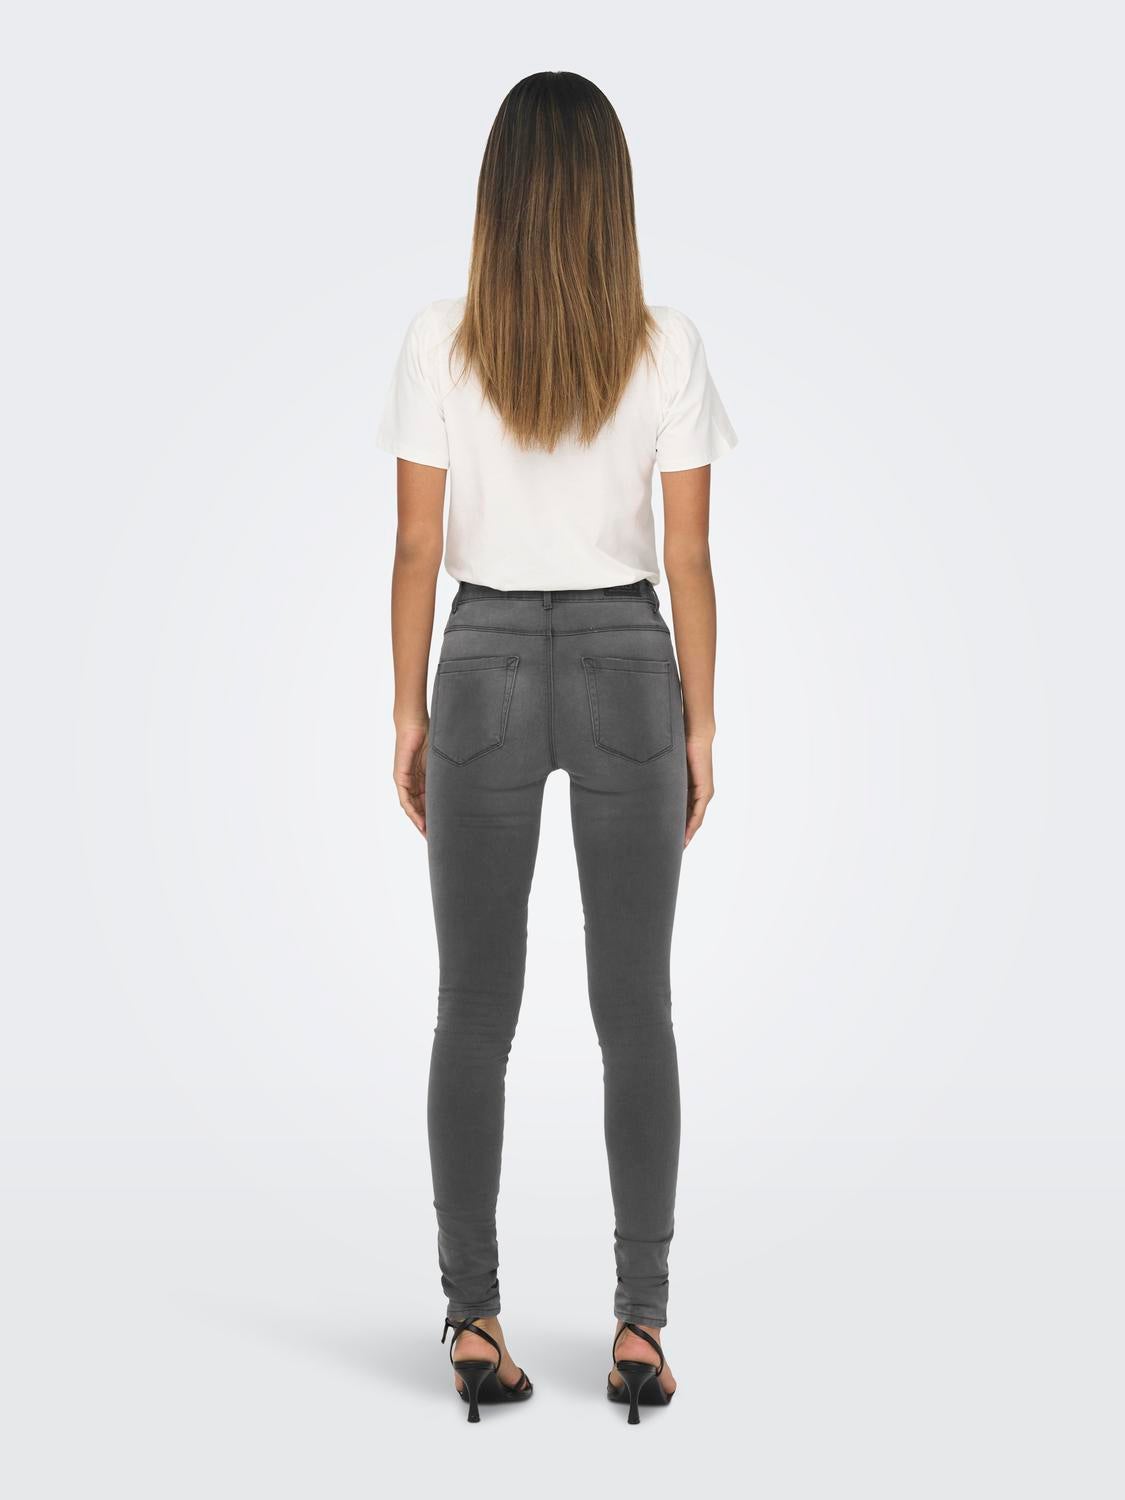 Jeans Mujer Gris Oscuro Only - 15119517 - 15119517.31